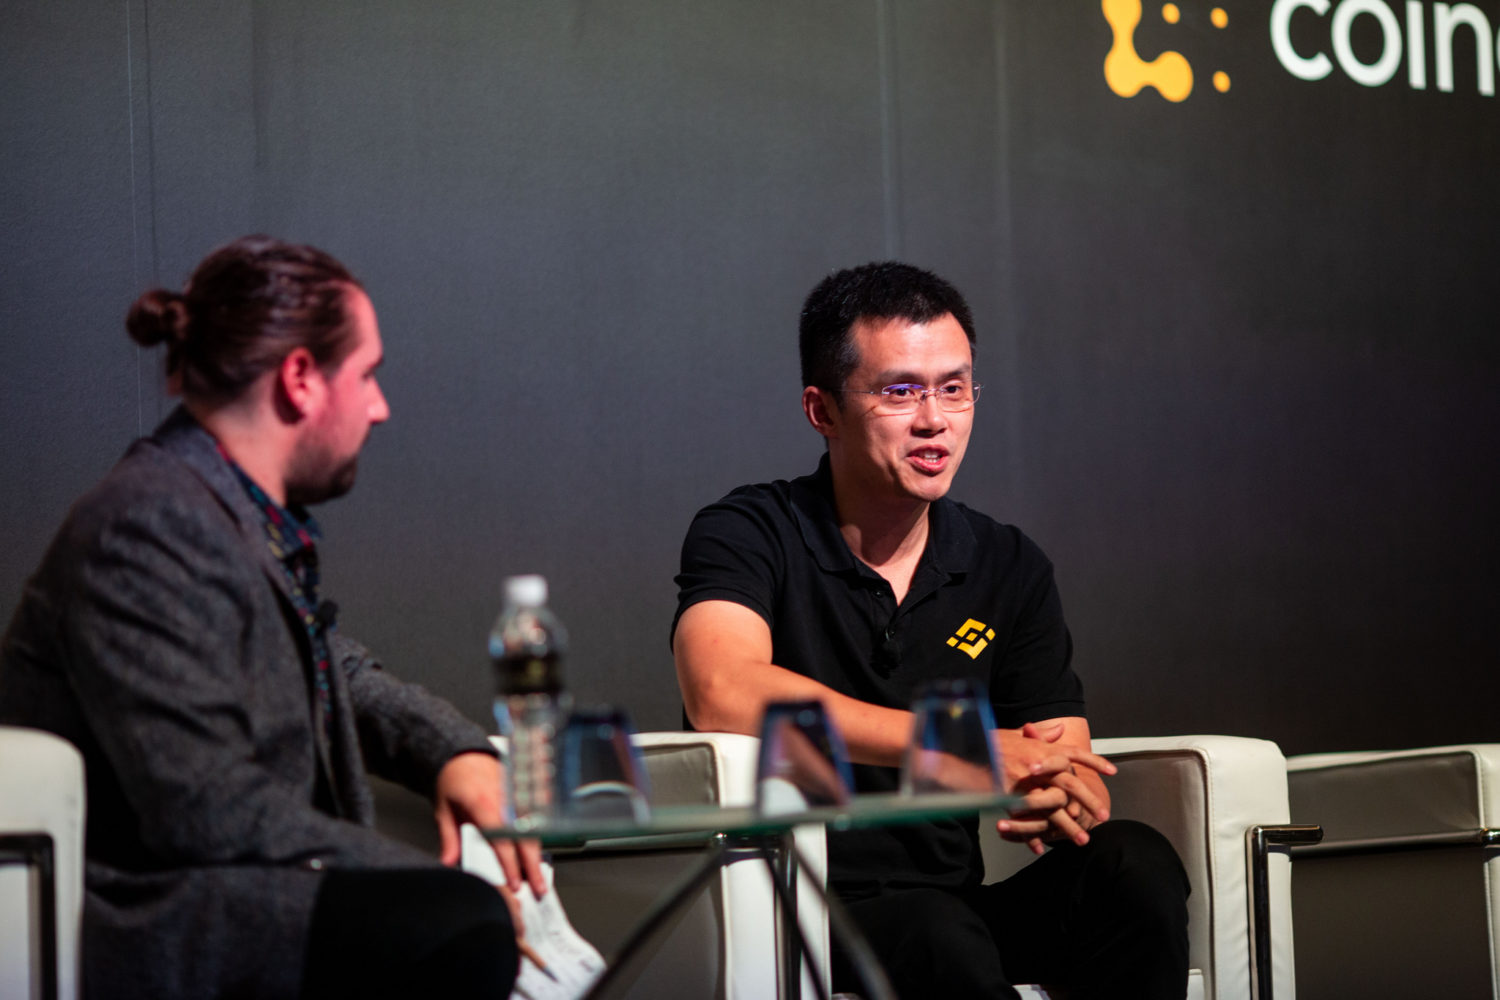 Binance’s Crypto Winter Strategy: Build And Beef Up Partnerships